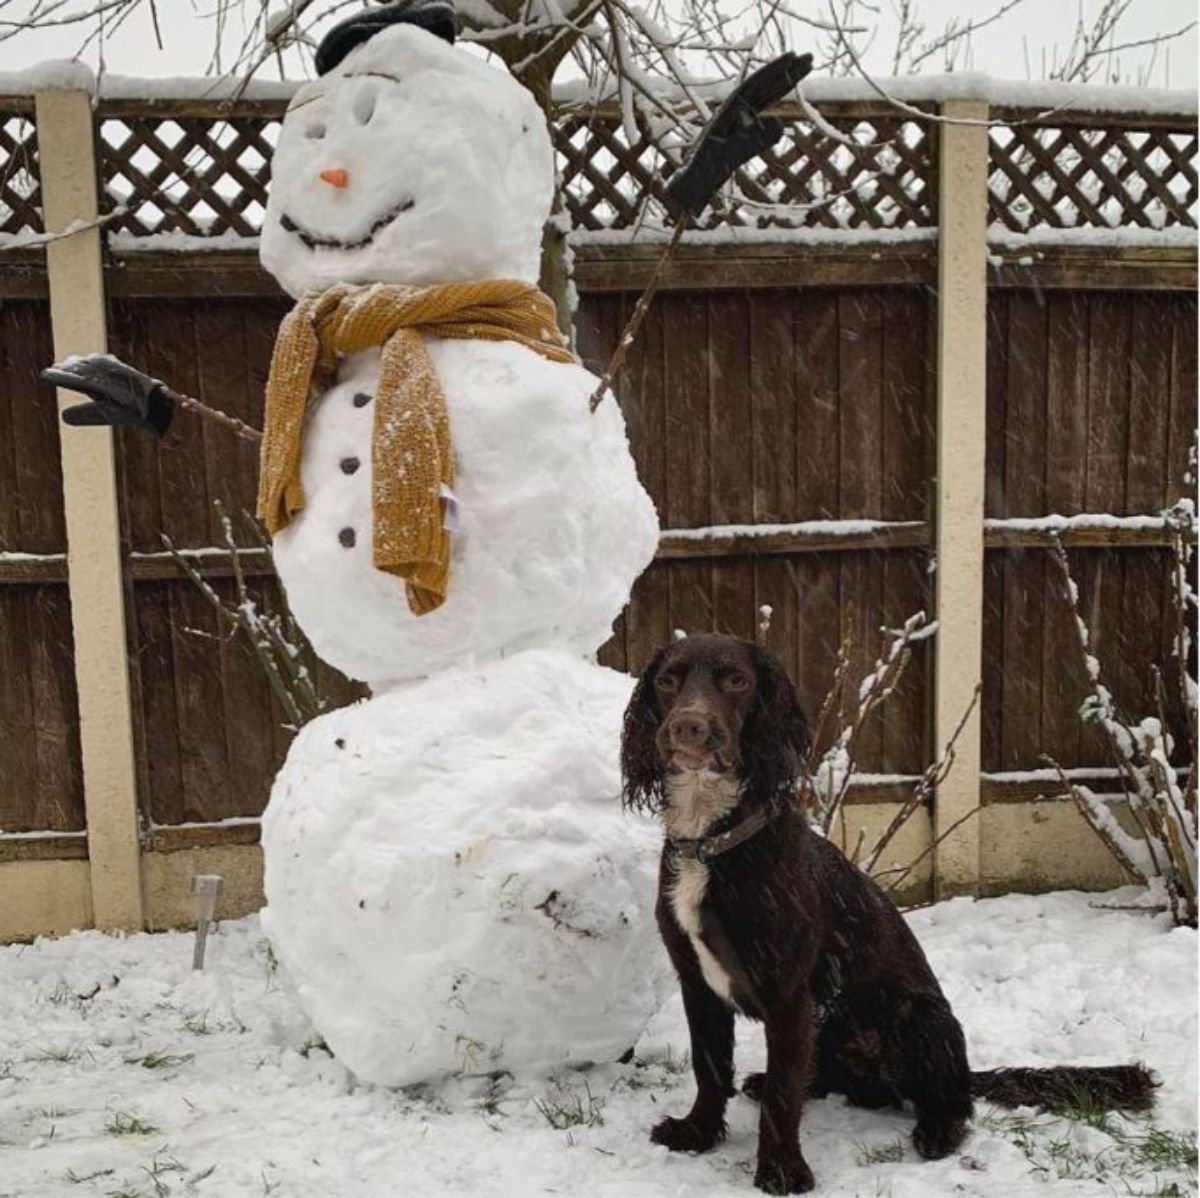 black and white dog sitting on snow next to a large snowman